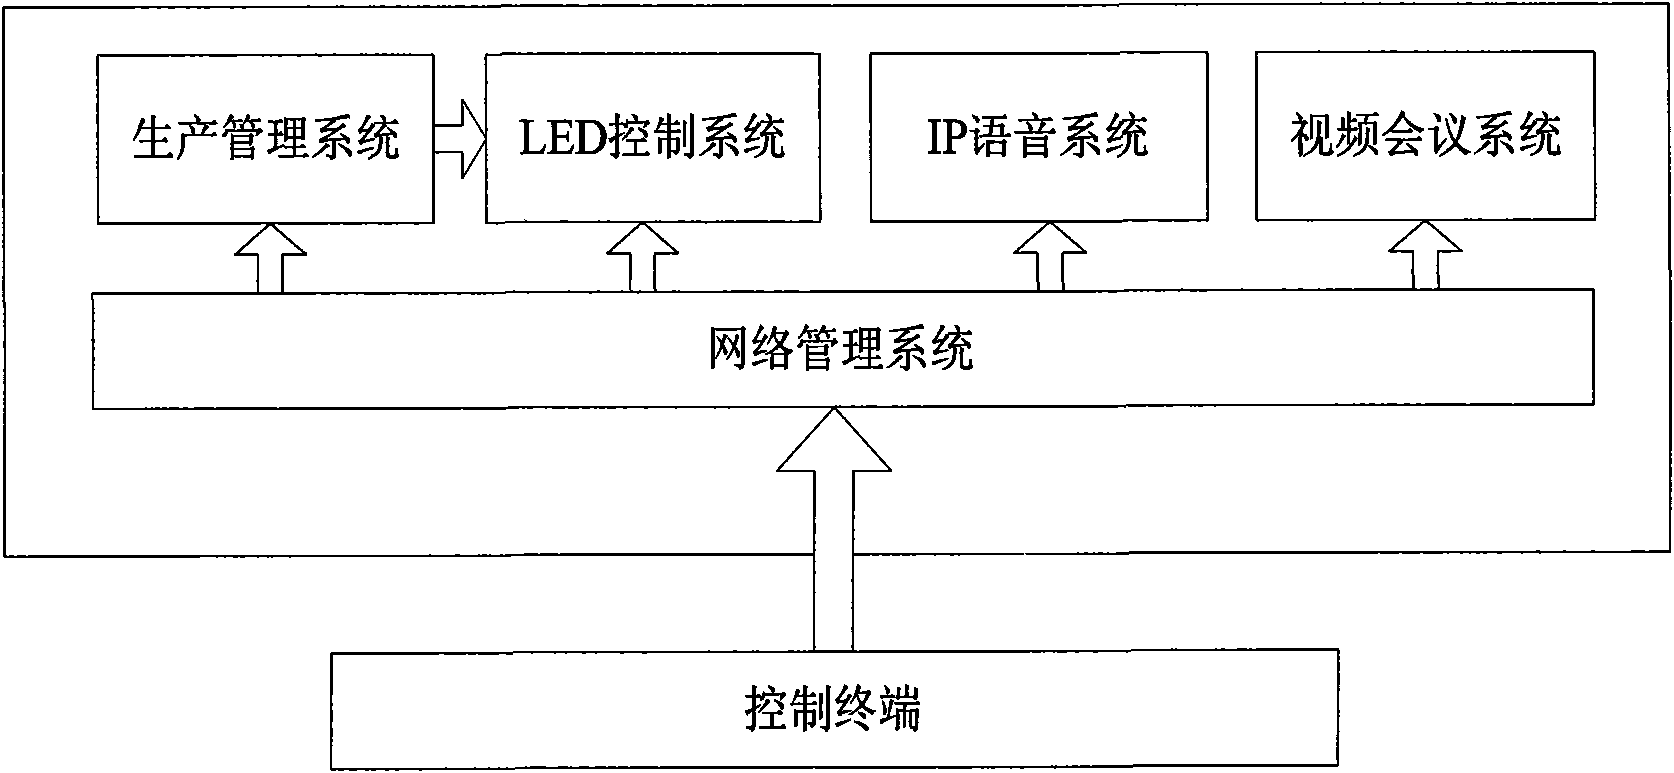 Production operation instruction issuing system and feedback method of large-scale discrete manufacturing industry